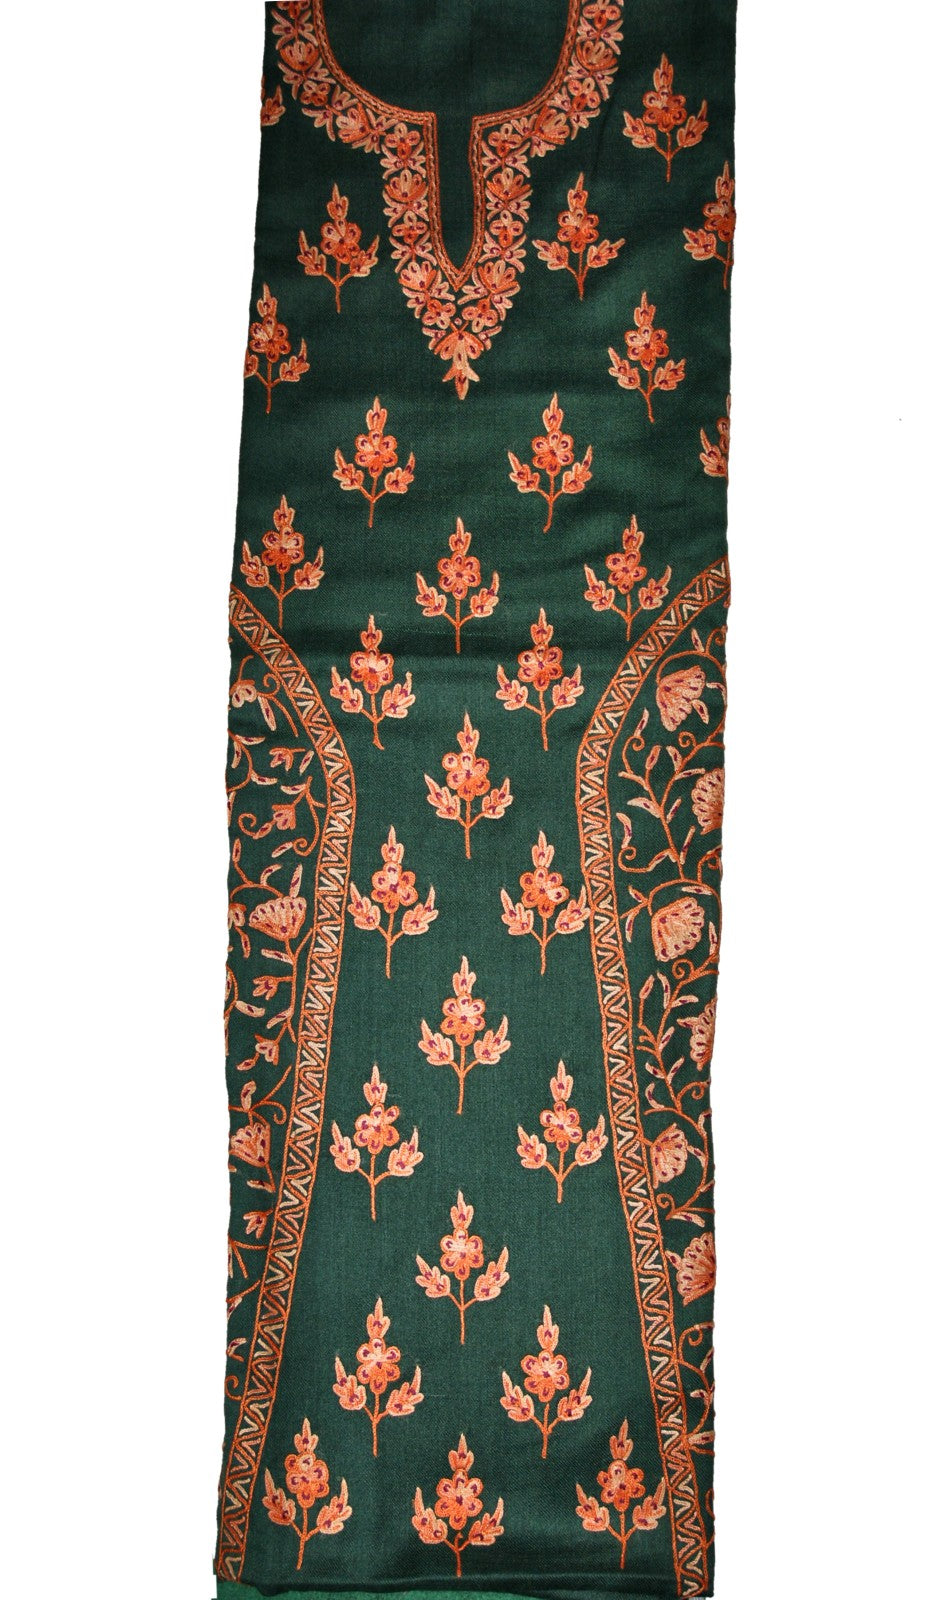 Woolen Salwar Kameez Suit Unstitched Fabric and Shawl Green, Rust Embroidery #FS-472